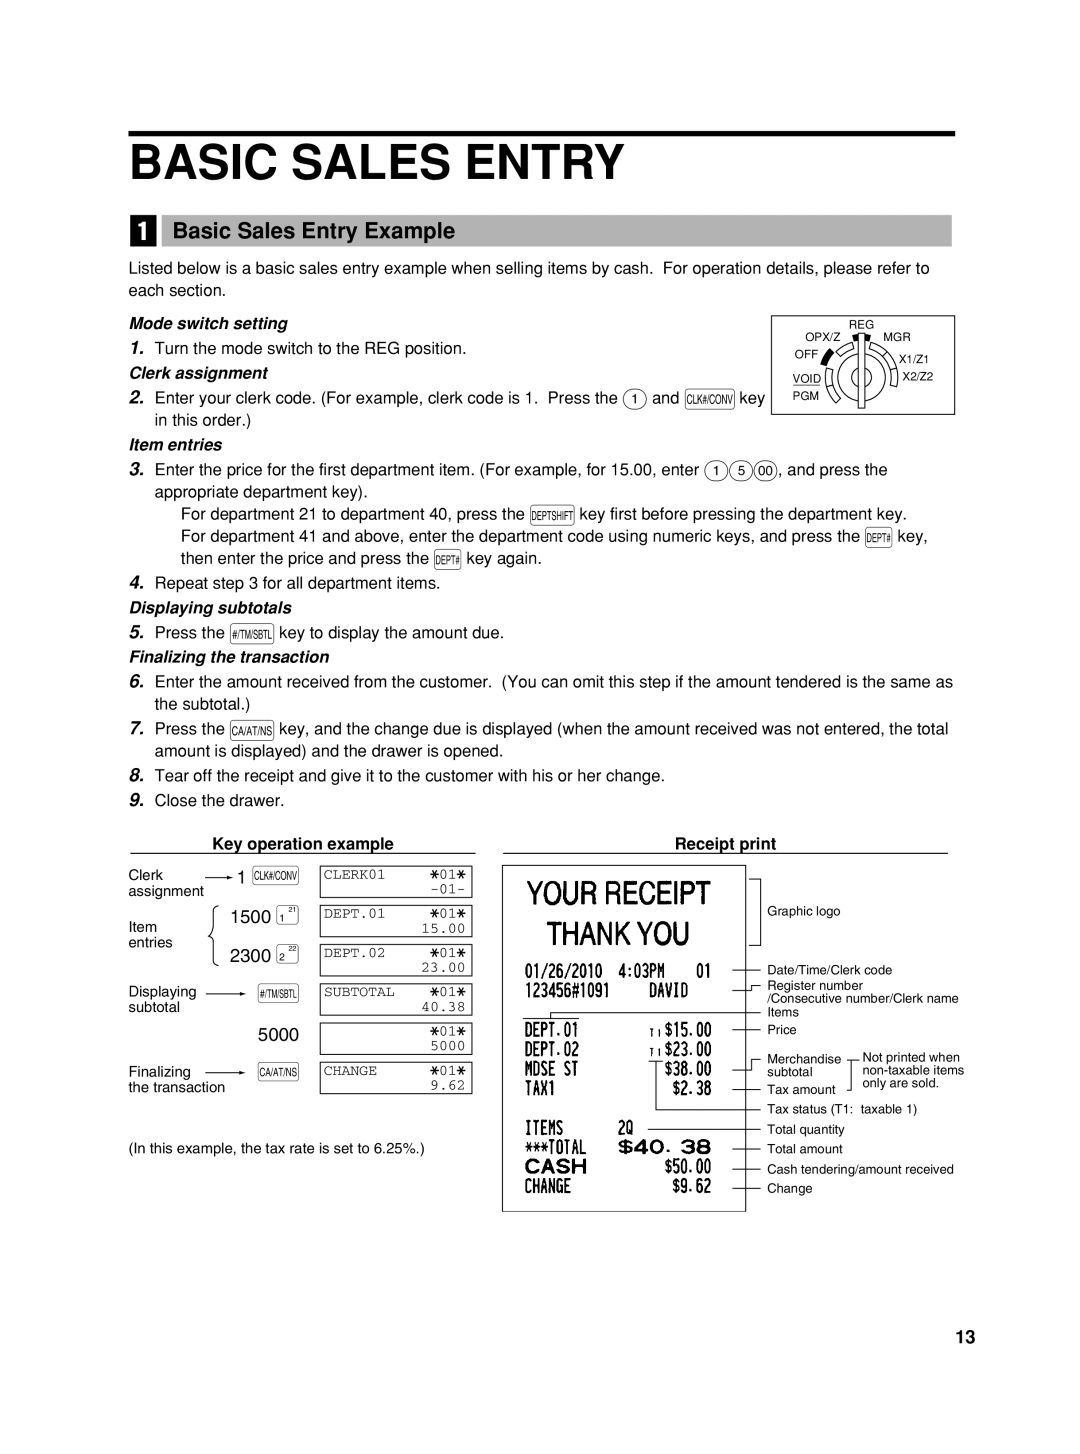 Sharp XE-A42S Basic Sales Entry Example, Mode switch setting, Clerk assignment, Item entries, Displaying subtotals 